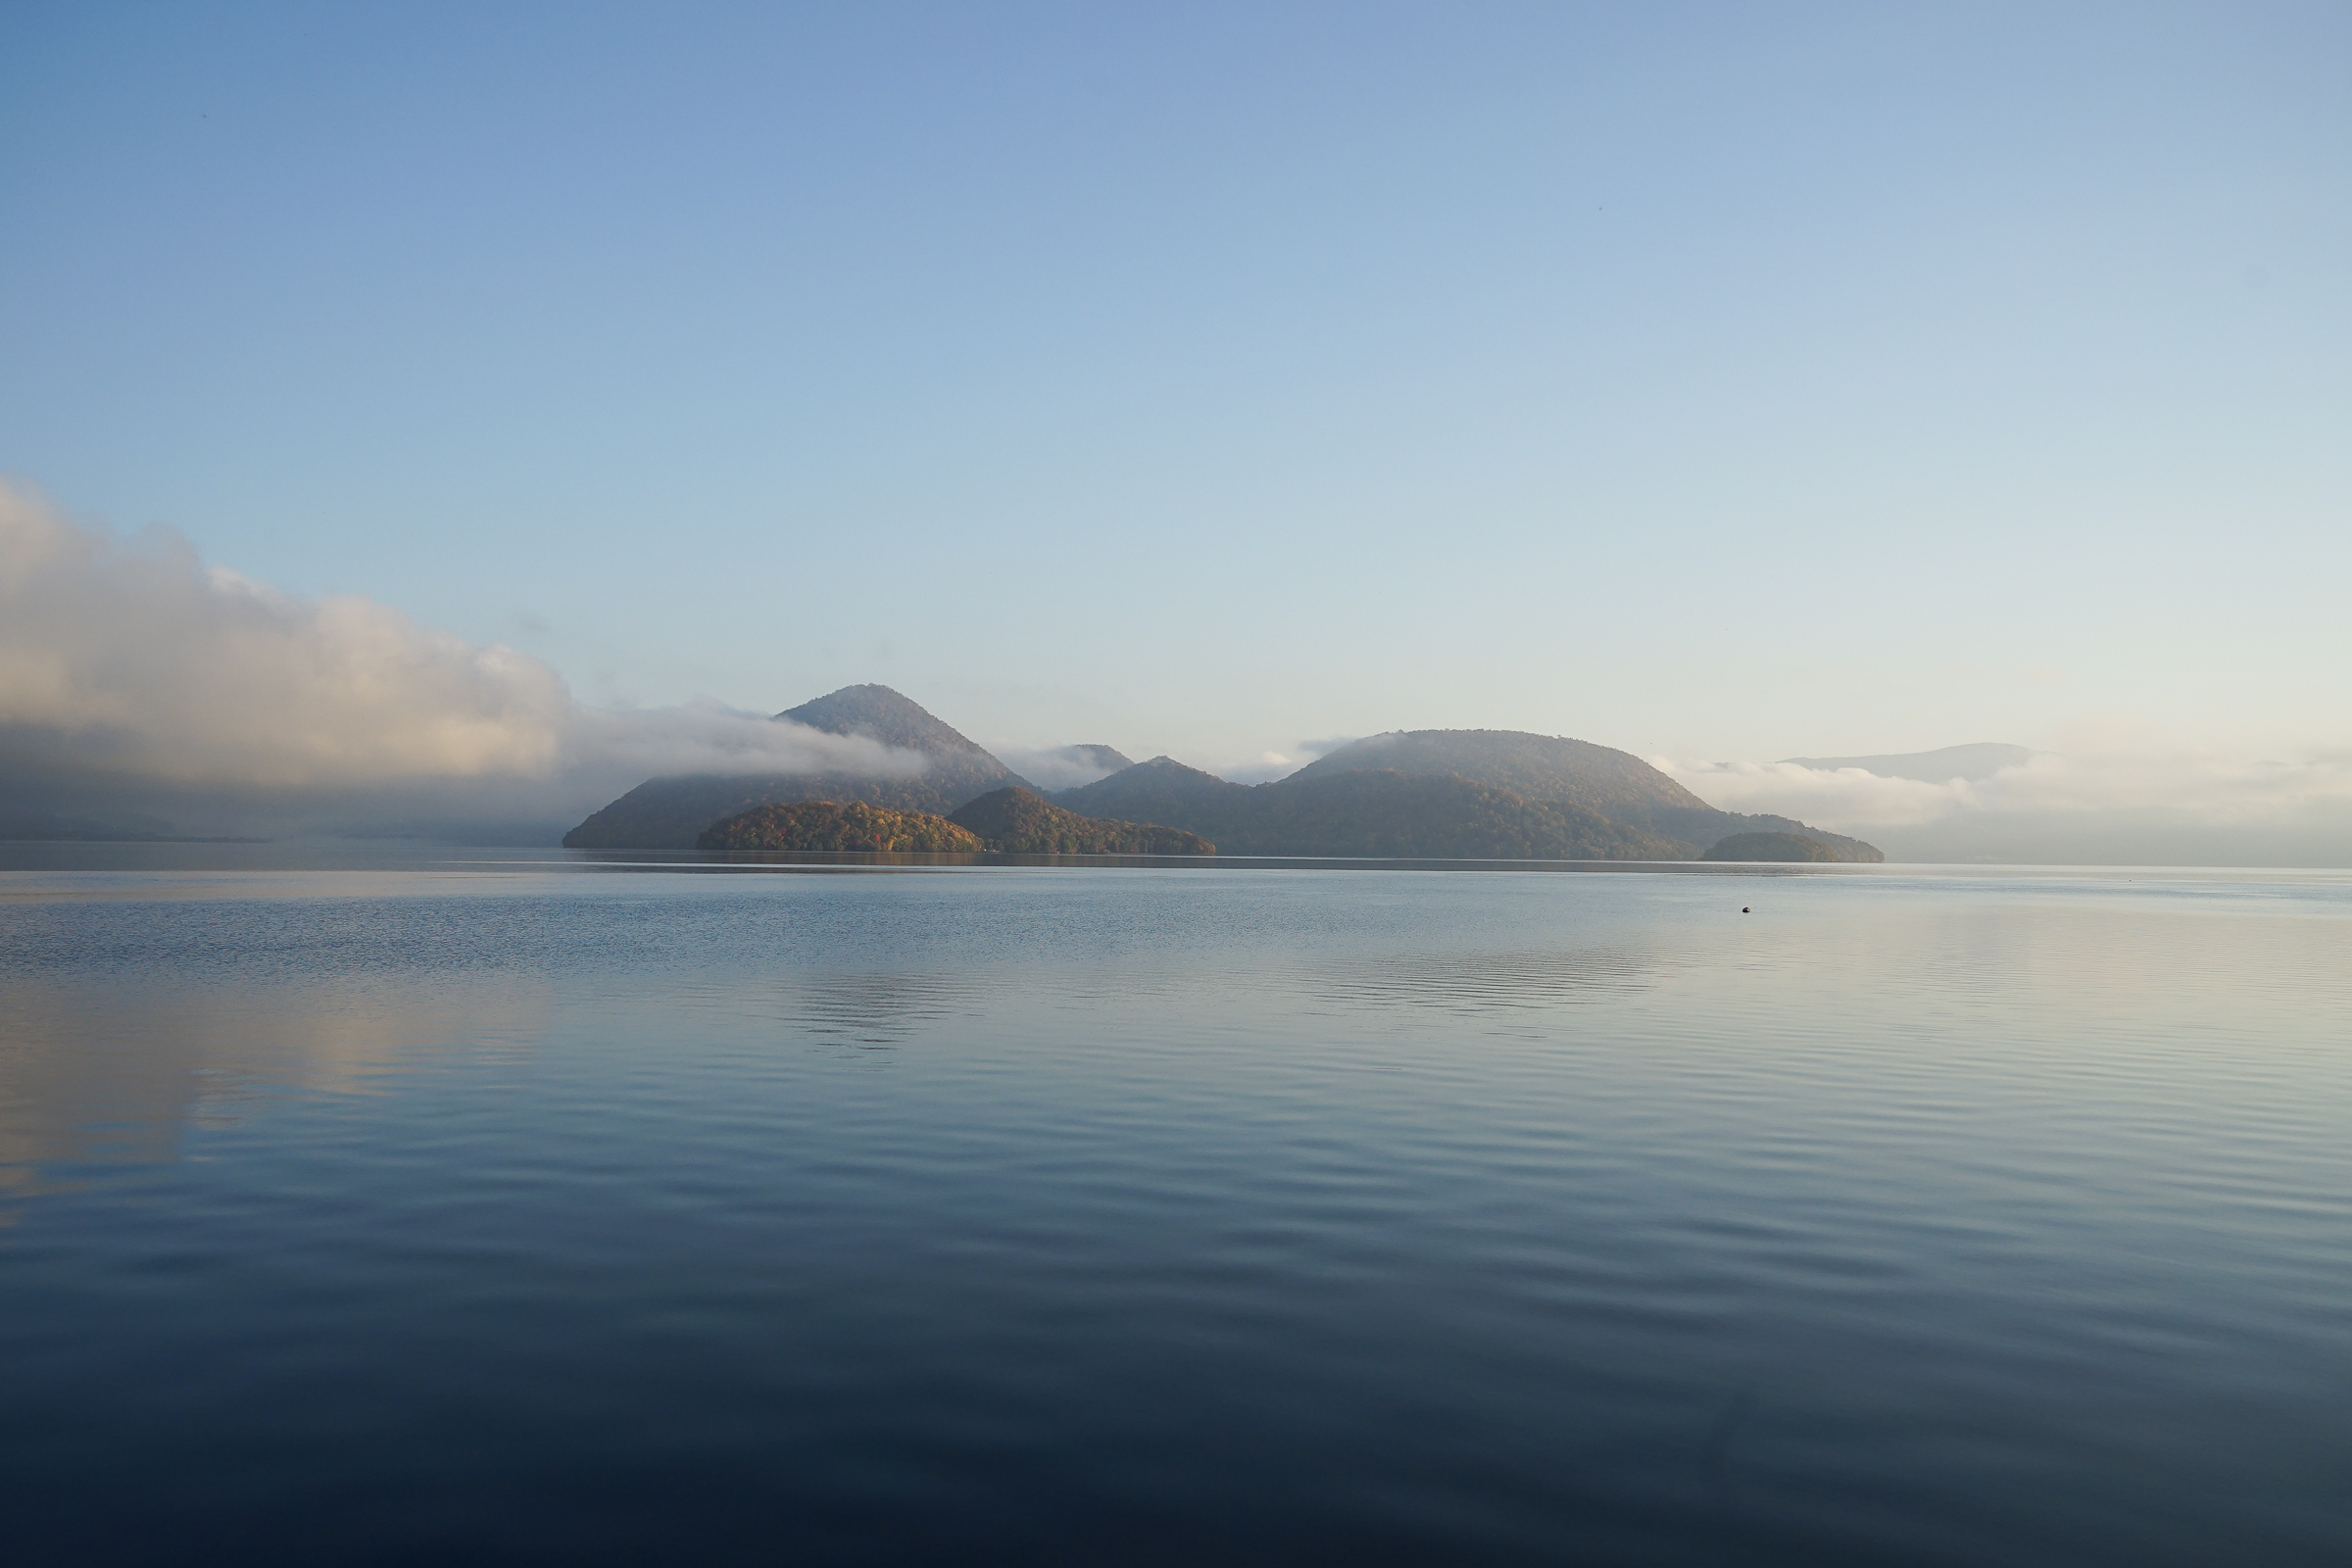 A photo of Nakajima Island in the middle of Lake Toya. It is the early morning and the water is very still, with mist rising over the island.